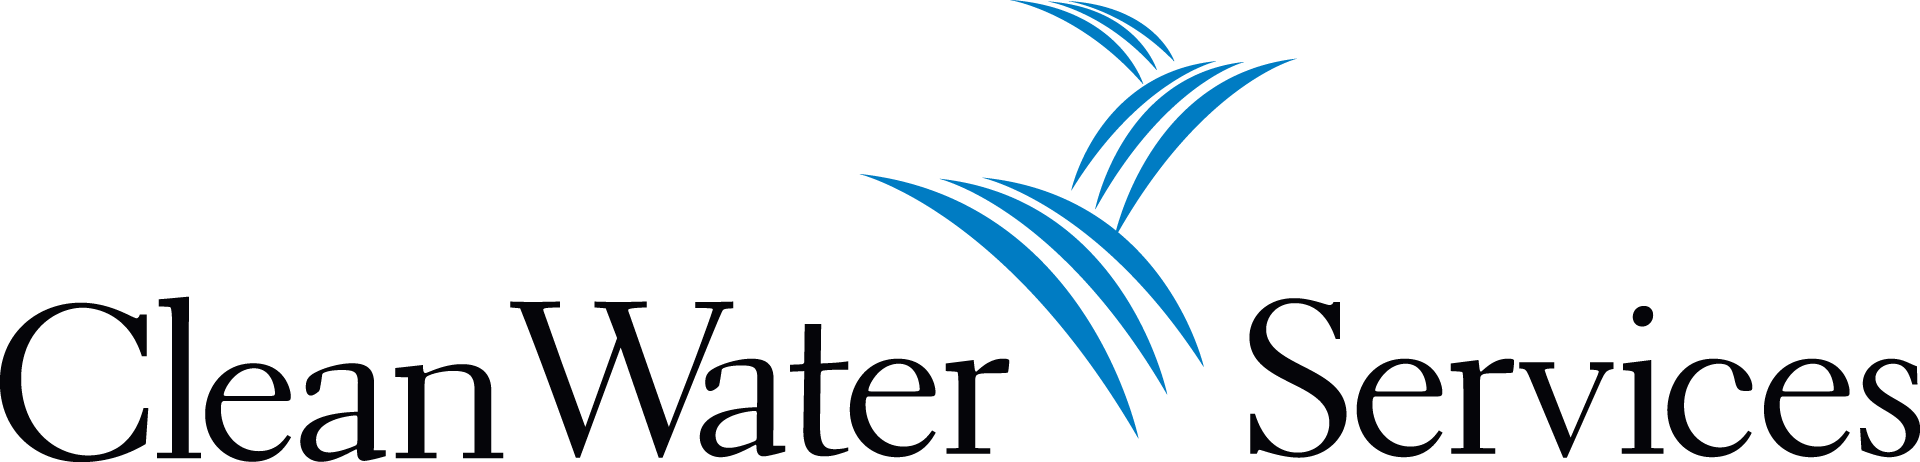 Clean Water Services NEW logo 285 _ Black